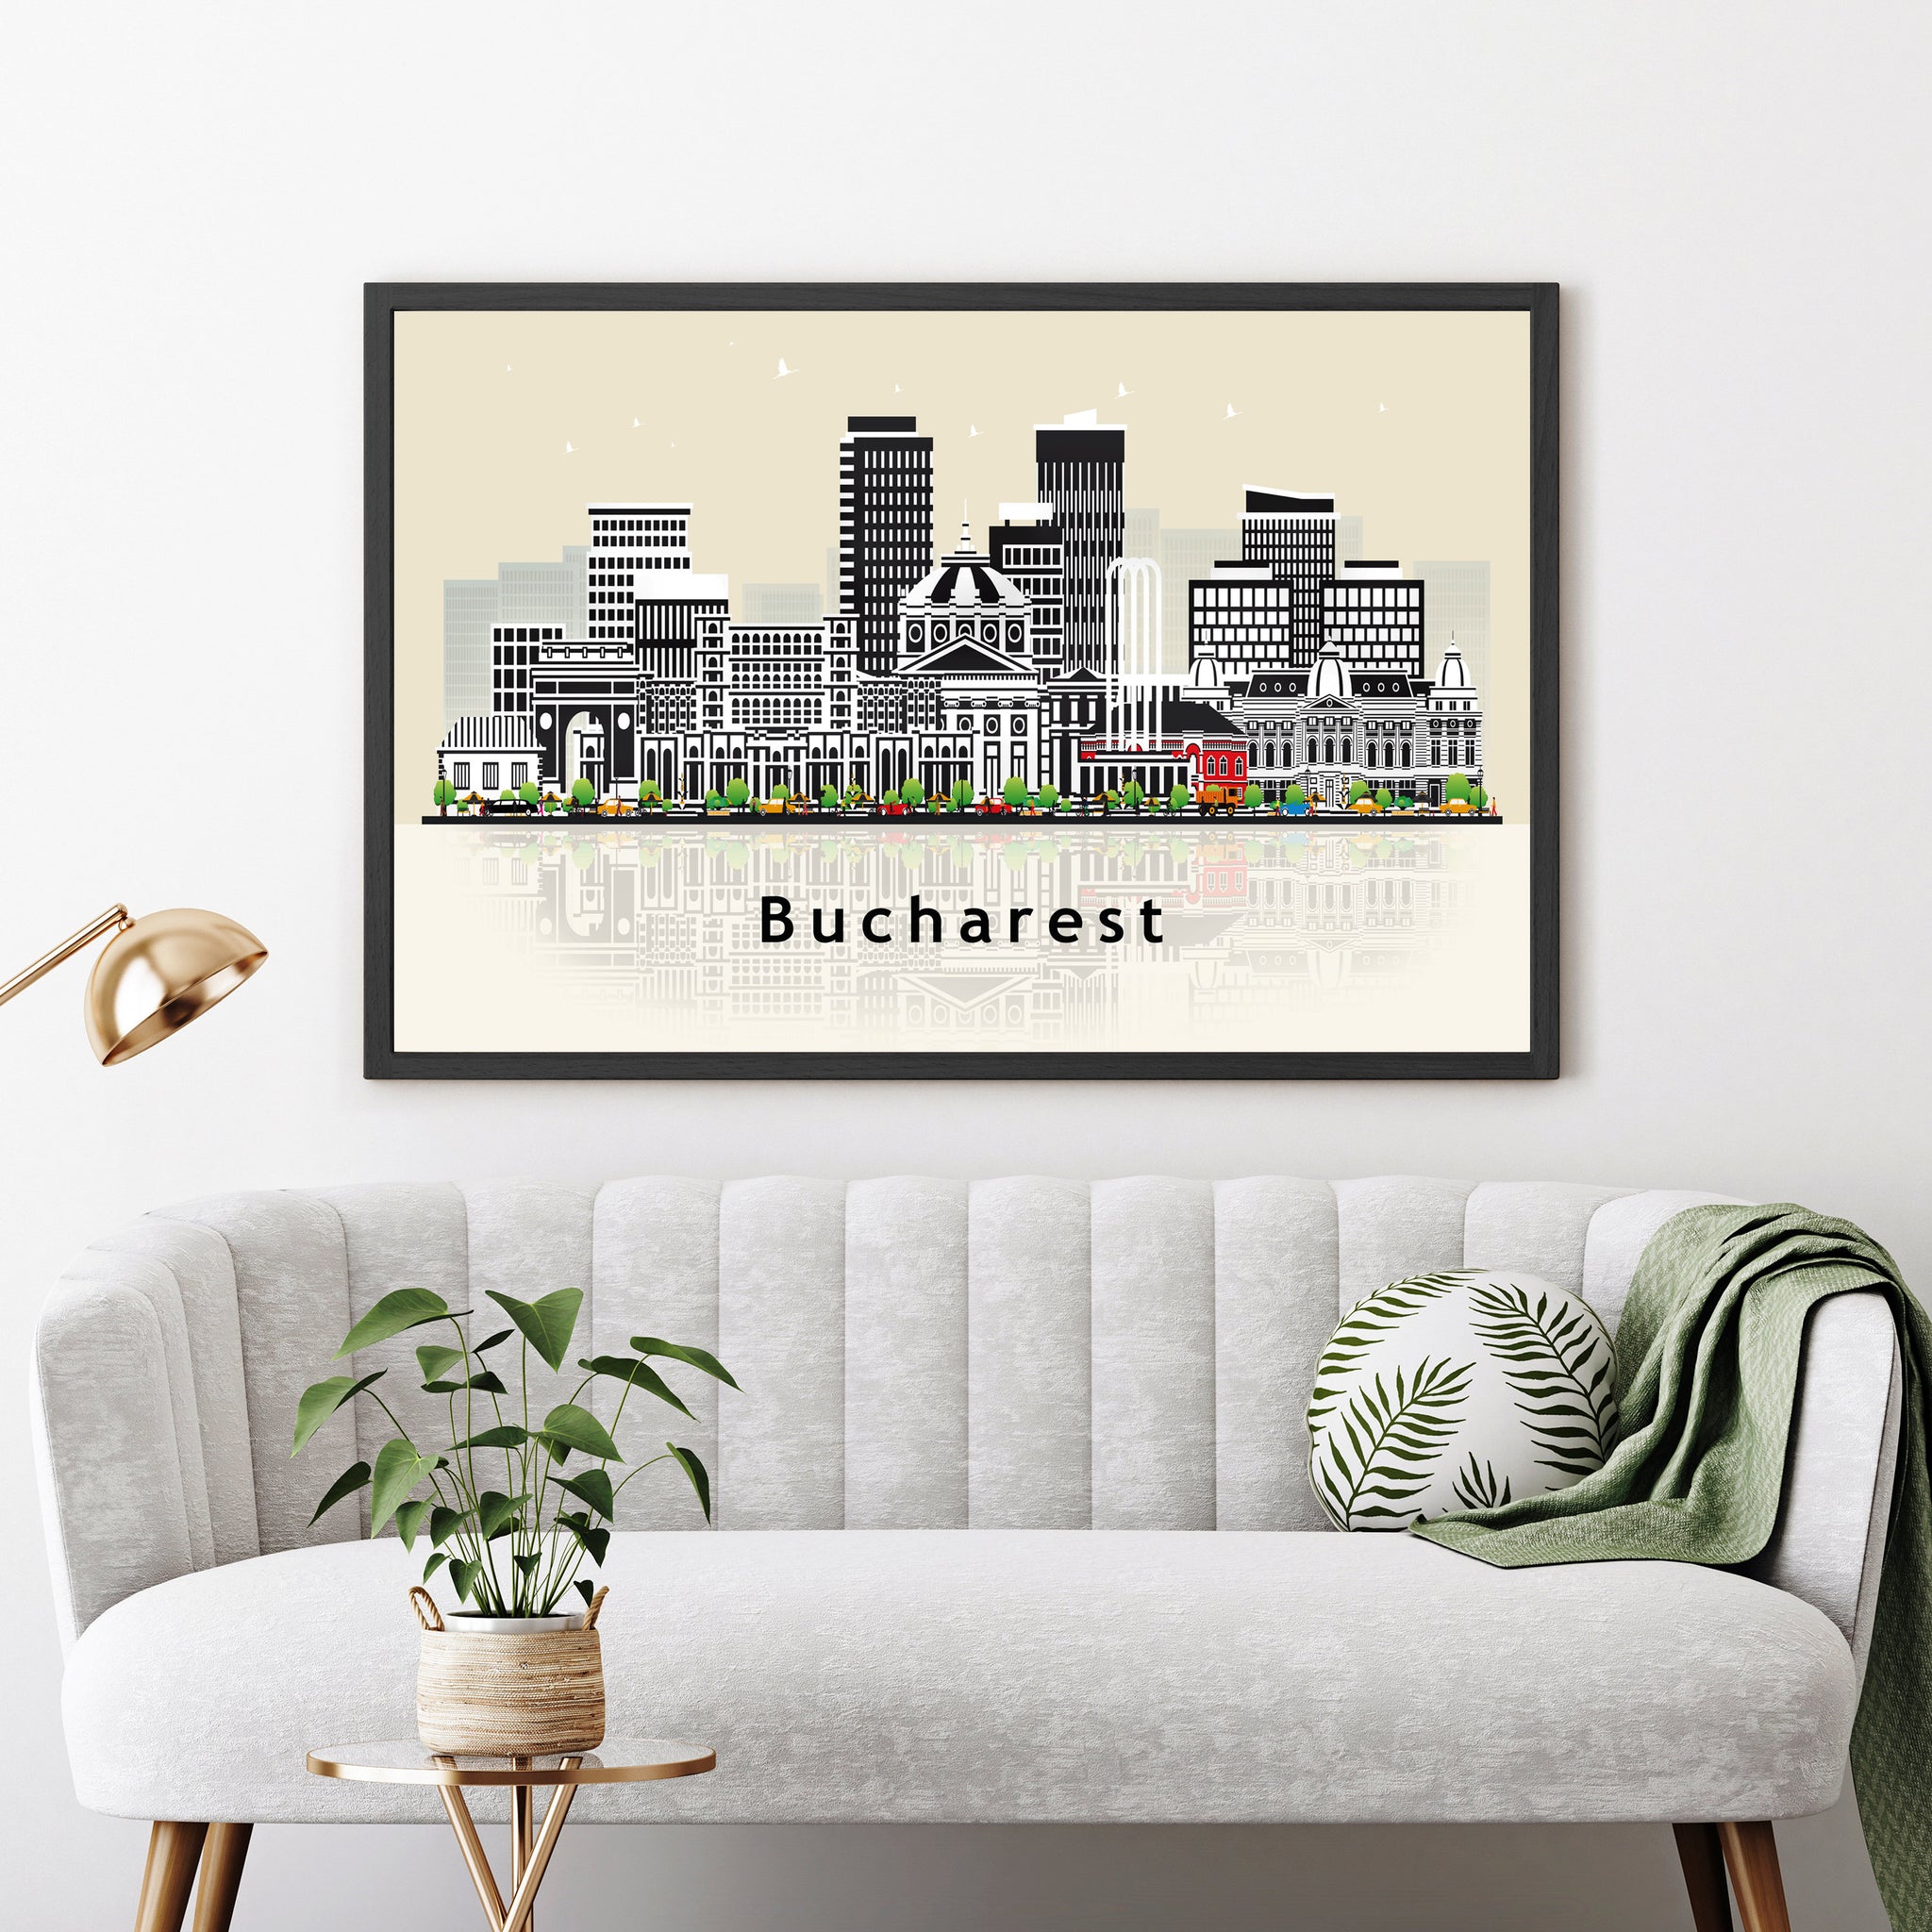 BUCHAREST ROMANIA Illustration skyline poster, Modern skyline cityscape poster print, Romania landmark map poster, Home wall decoration